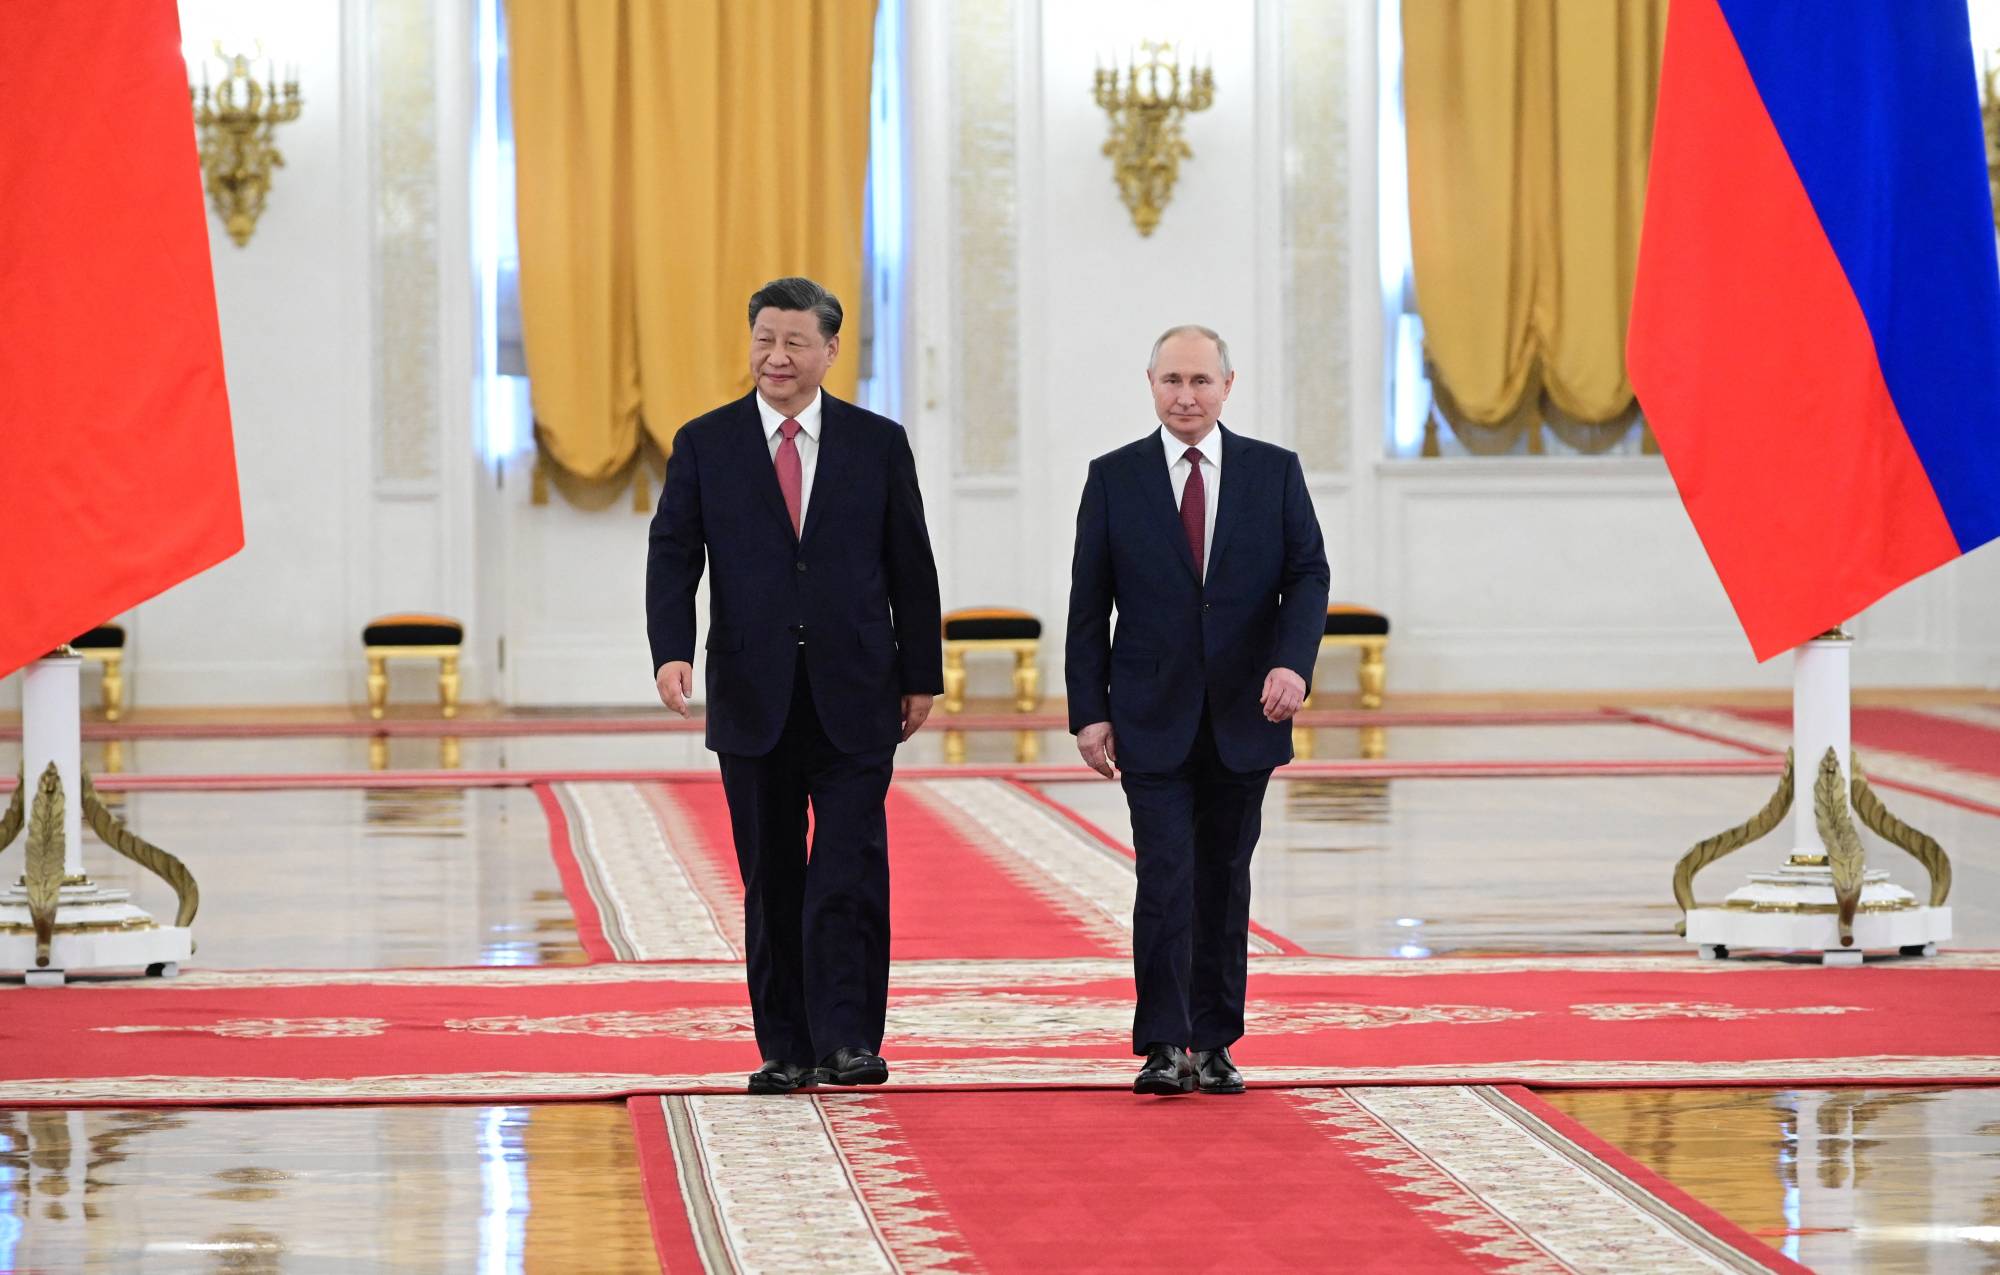 Russian President Vladimir Putin and his Chinese counterpart, Xi Jinping, attend a welcome ceremony ahead of their talks at the Kremlin in Moscow on Tuesday. | SPUTNIK / KREMLIN / VIA REUTERS  